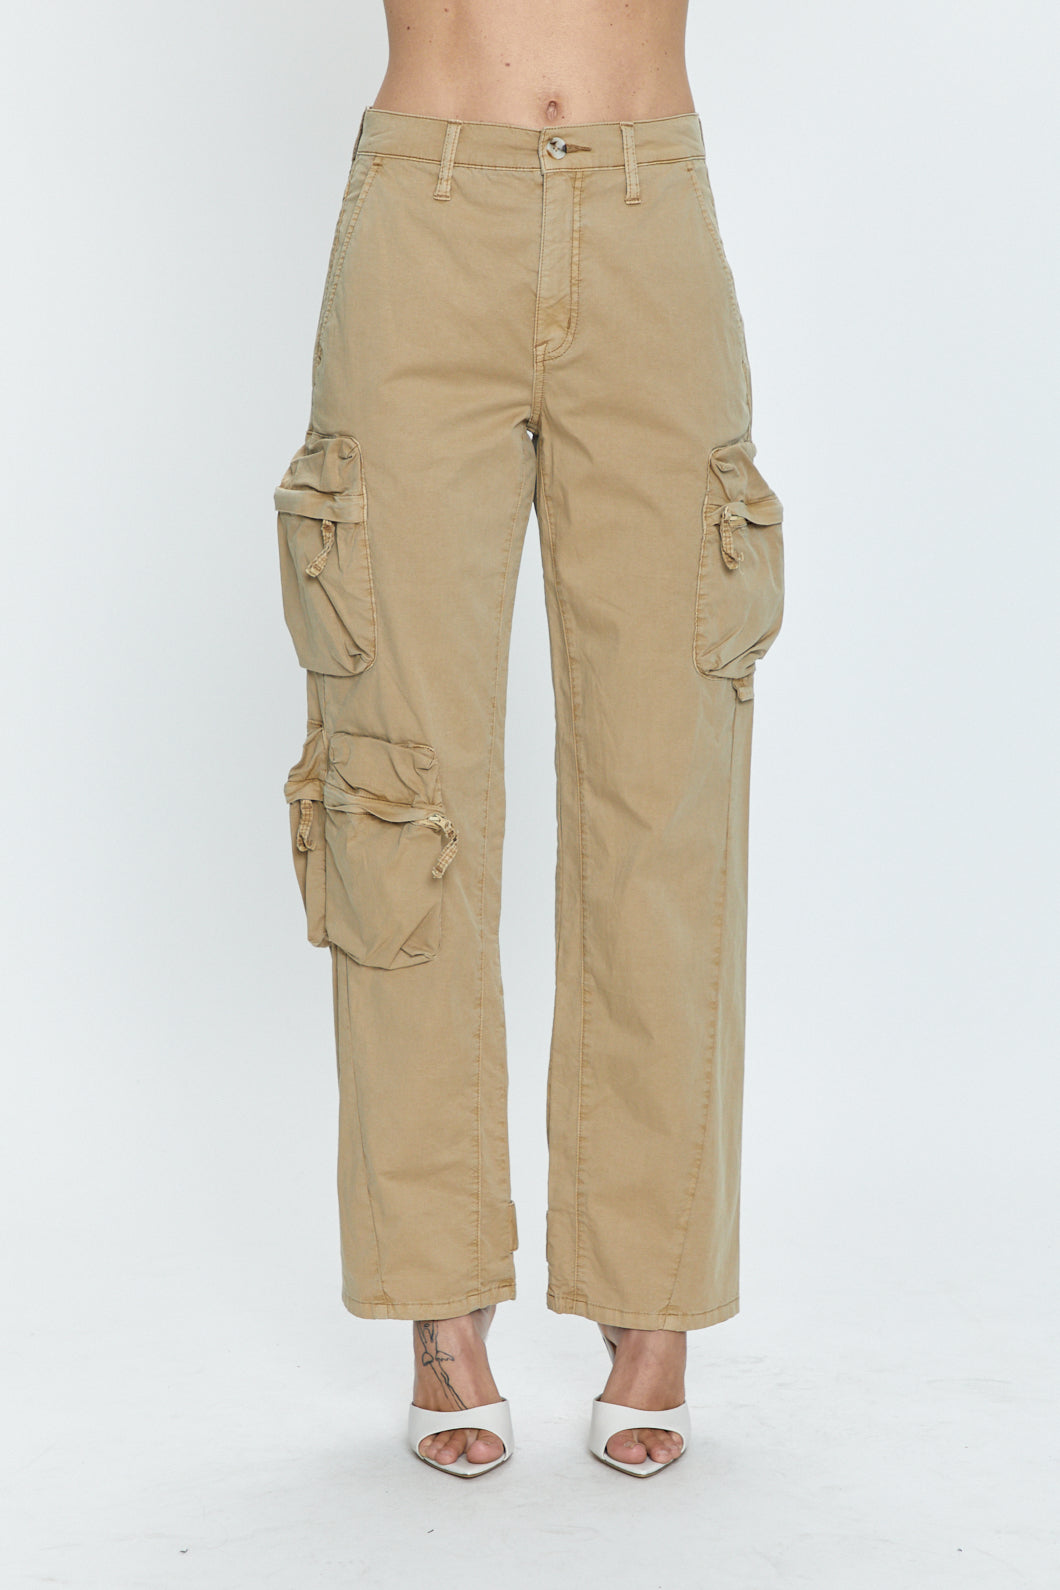 Oversized Loose Cargo Pants Womens For Women And Girls Retro Straight  Casual Streetwear With Wide Leg And Pocket Apricot Cargo Style 230310 From  Kong01, $23.18 | DHgate.Com